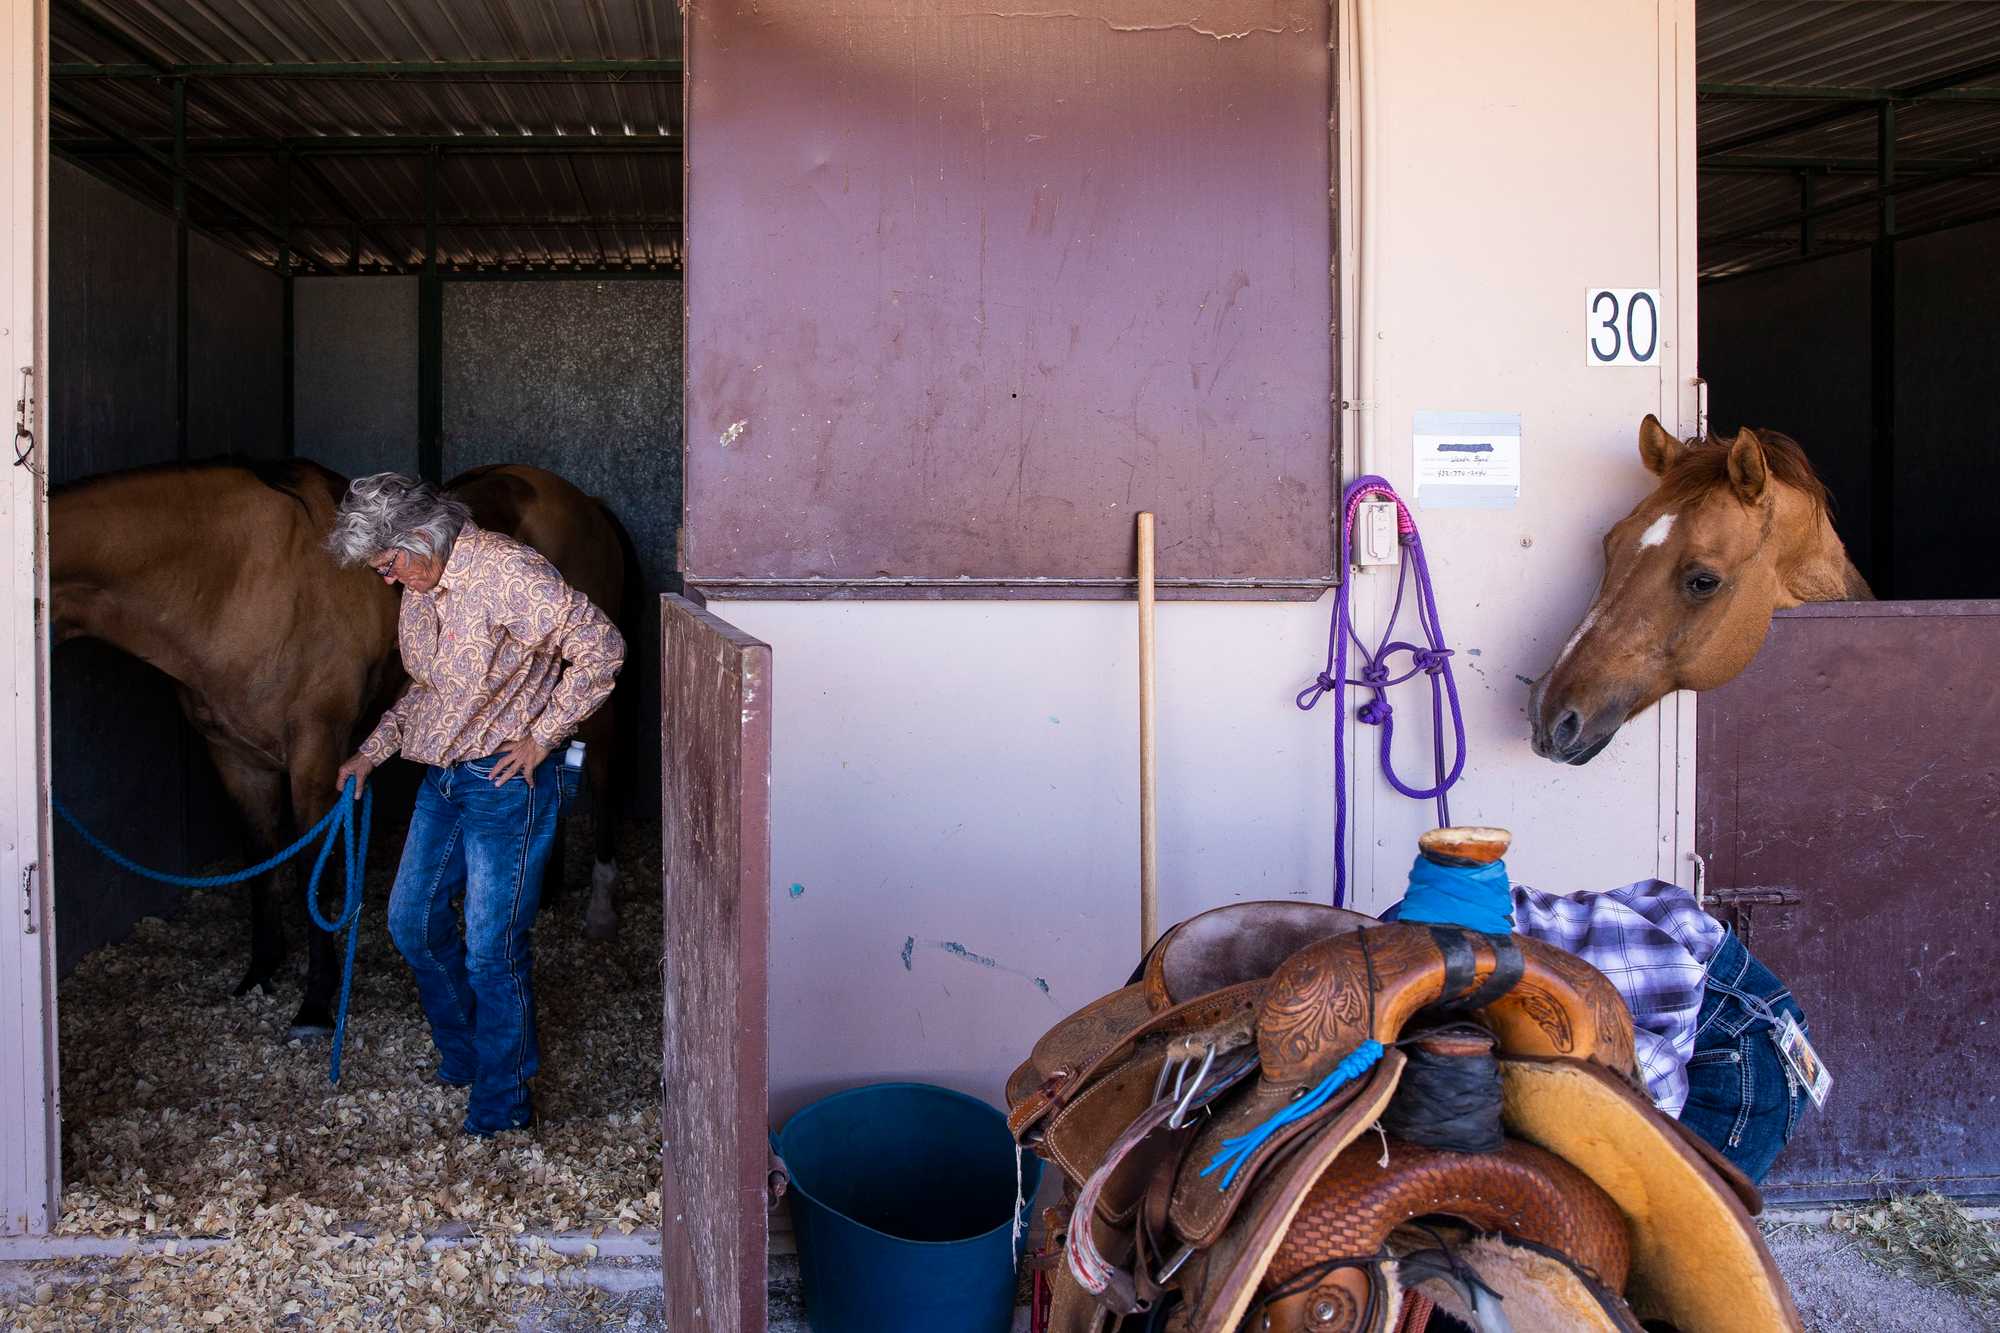 Cindy Cowan walked her 22-year-old horse, Superman, into his stall after competing at the rodeo.